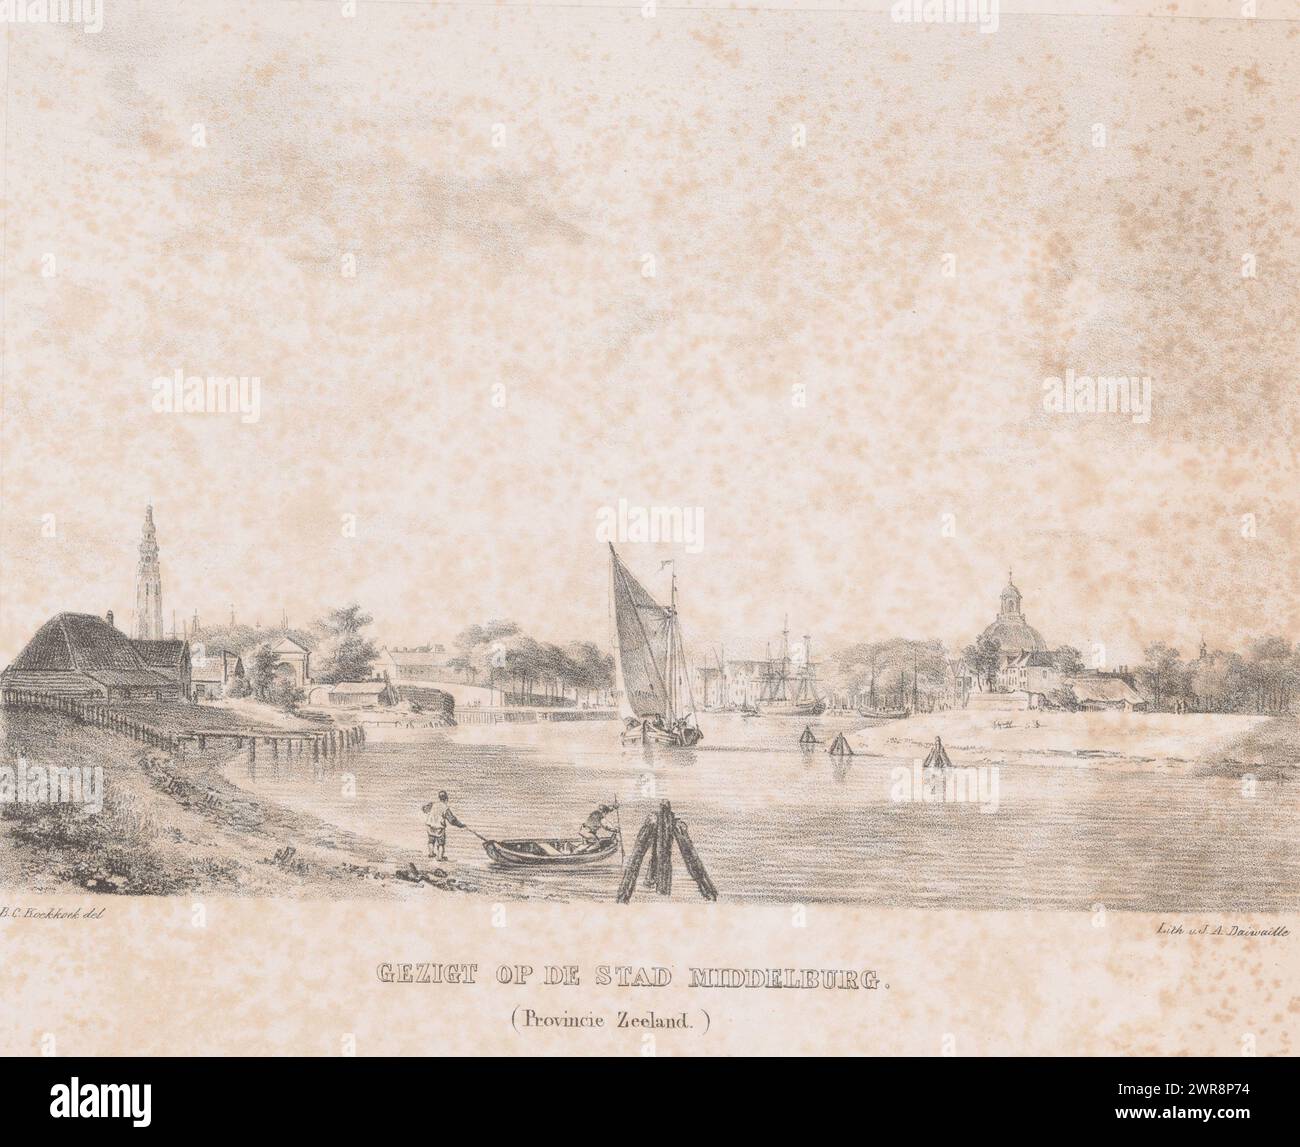 View of Middelburg, View of the city of Middelburg (title on object), Picturesque views in the Netherlands (series title), Vues Pittoresques du Royaume des Pays-Bas (series title), print maker: Barend Cornelis Koekkoek, after design by: Barend Cornelis Koekkoek, print maker: Jean Augustin Daiwaille, Amsterdam, 1831, paper, height 314 mm × width 400 mm, print Stock Photo